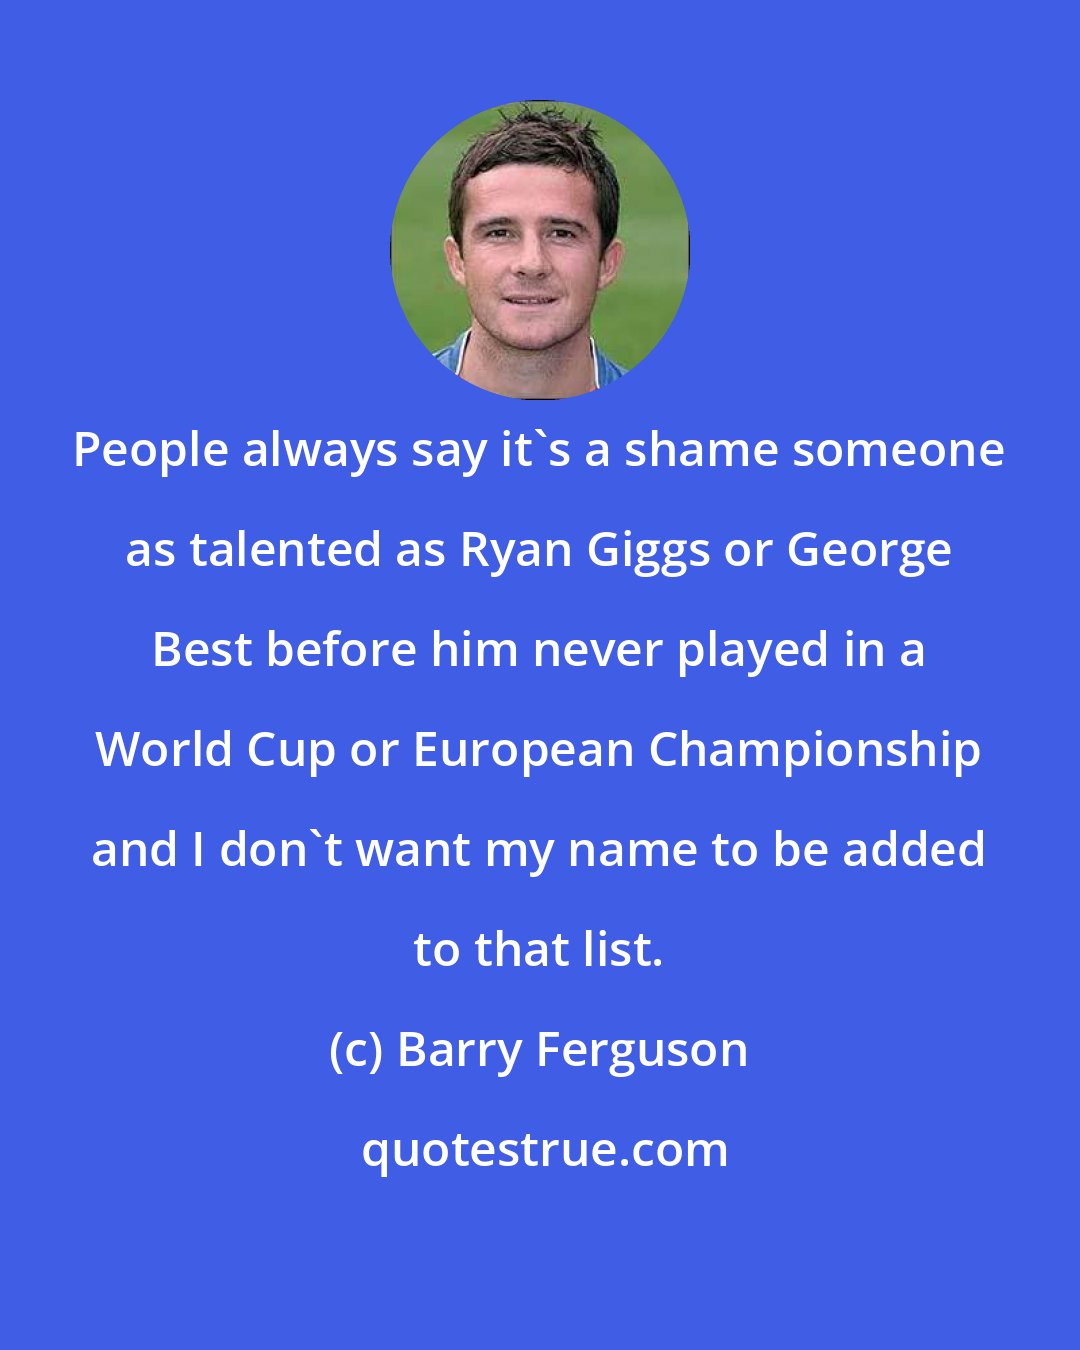 Barry Ferguson: People always say it's a shame someone as talented as Ryan Giggs or George Best before him never played in a World Cup or European Championship and I don't want my name to be added to that list.